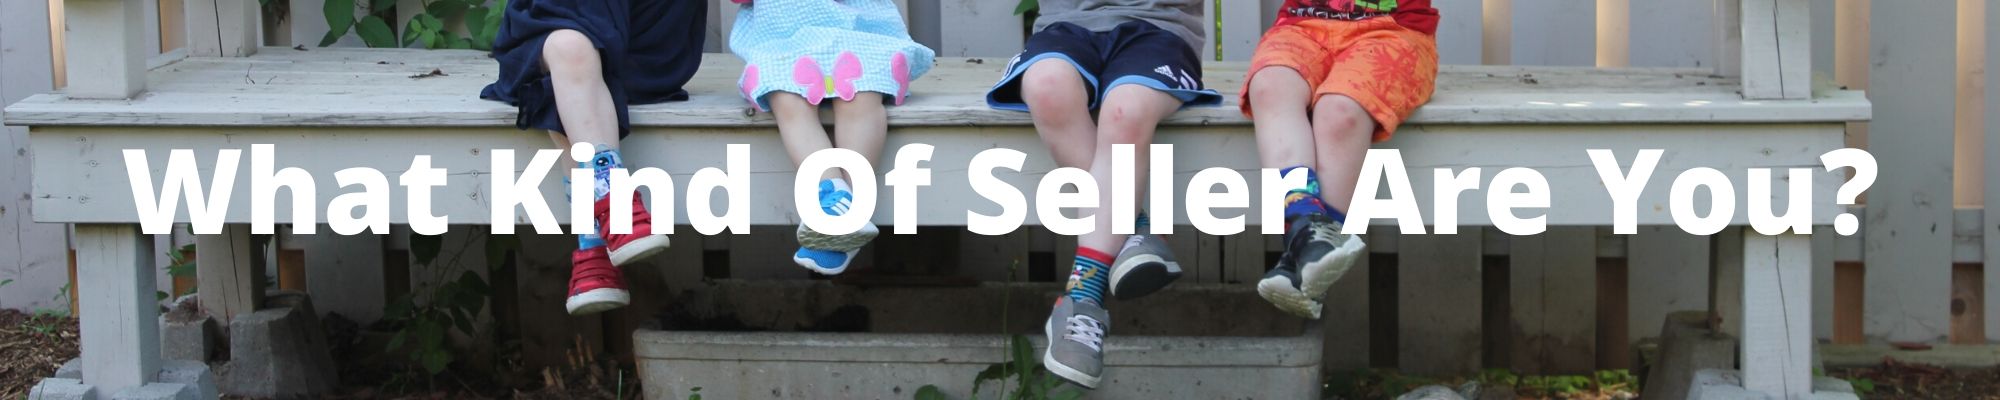 What Kind Of Seller Are You?